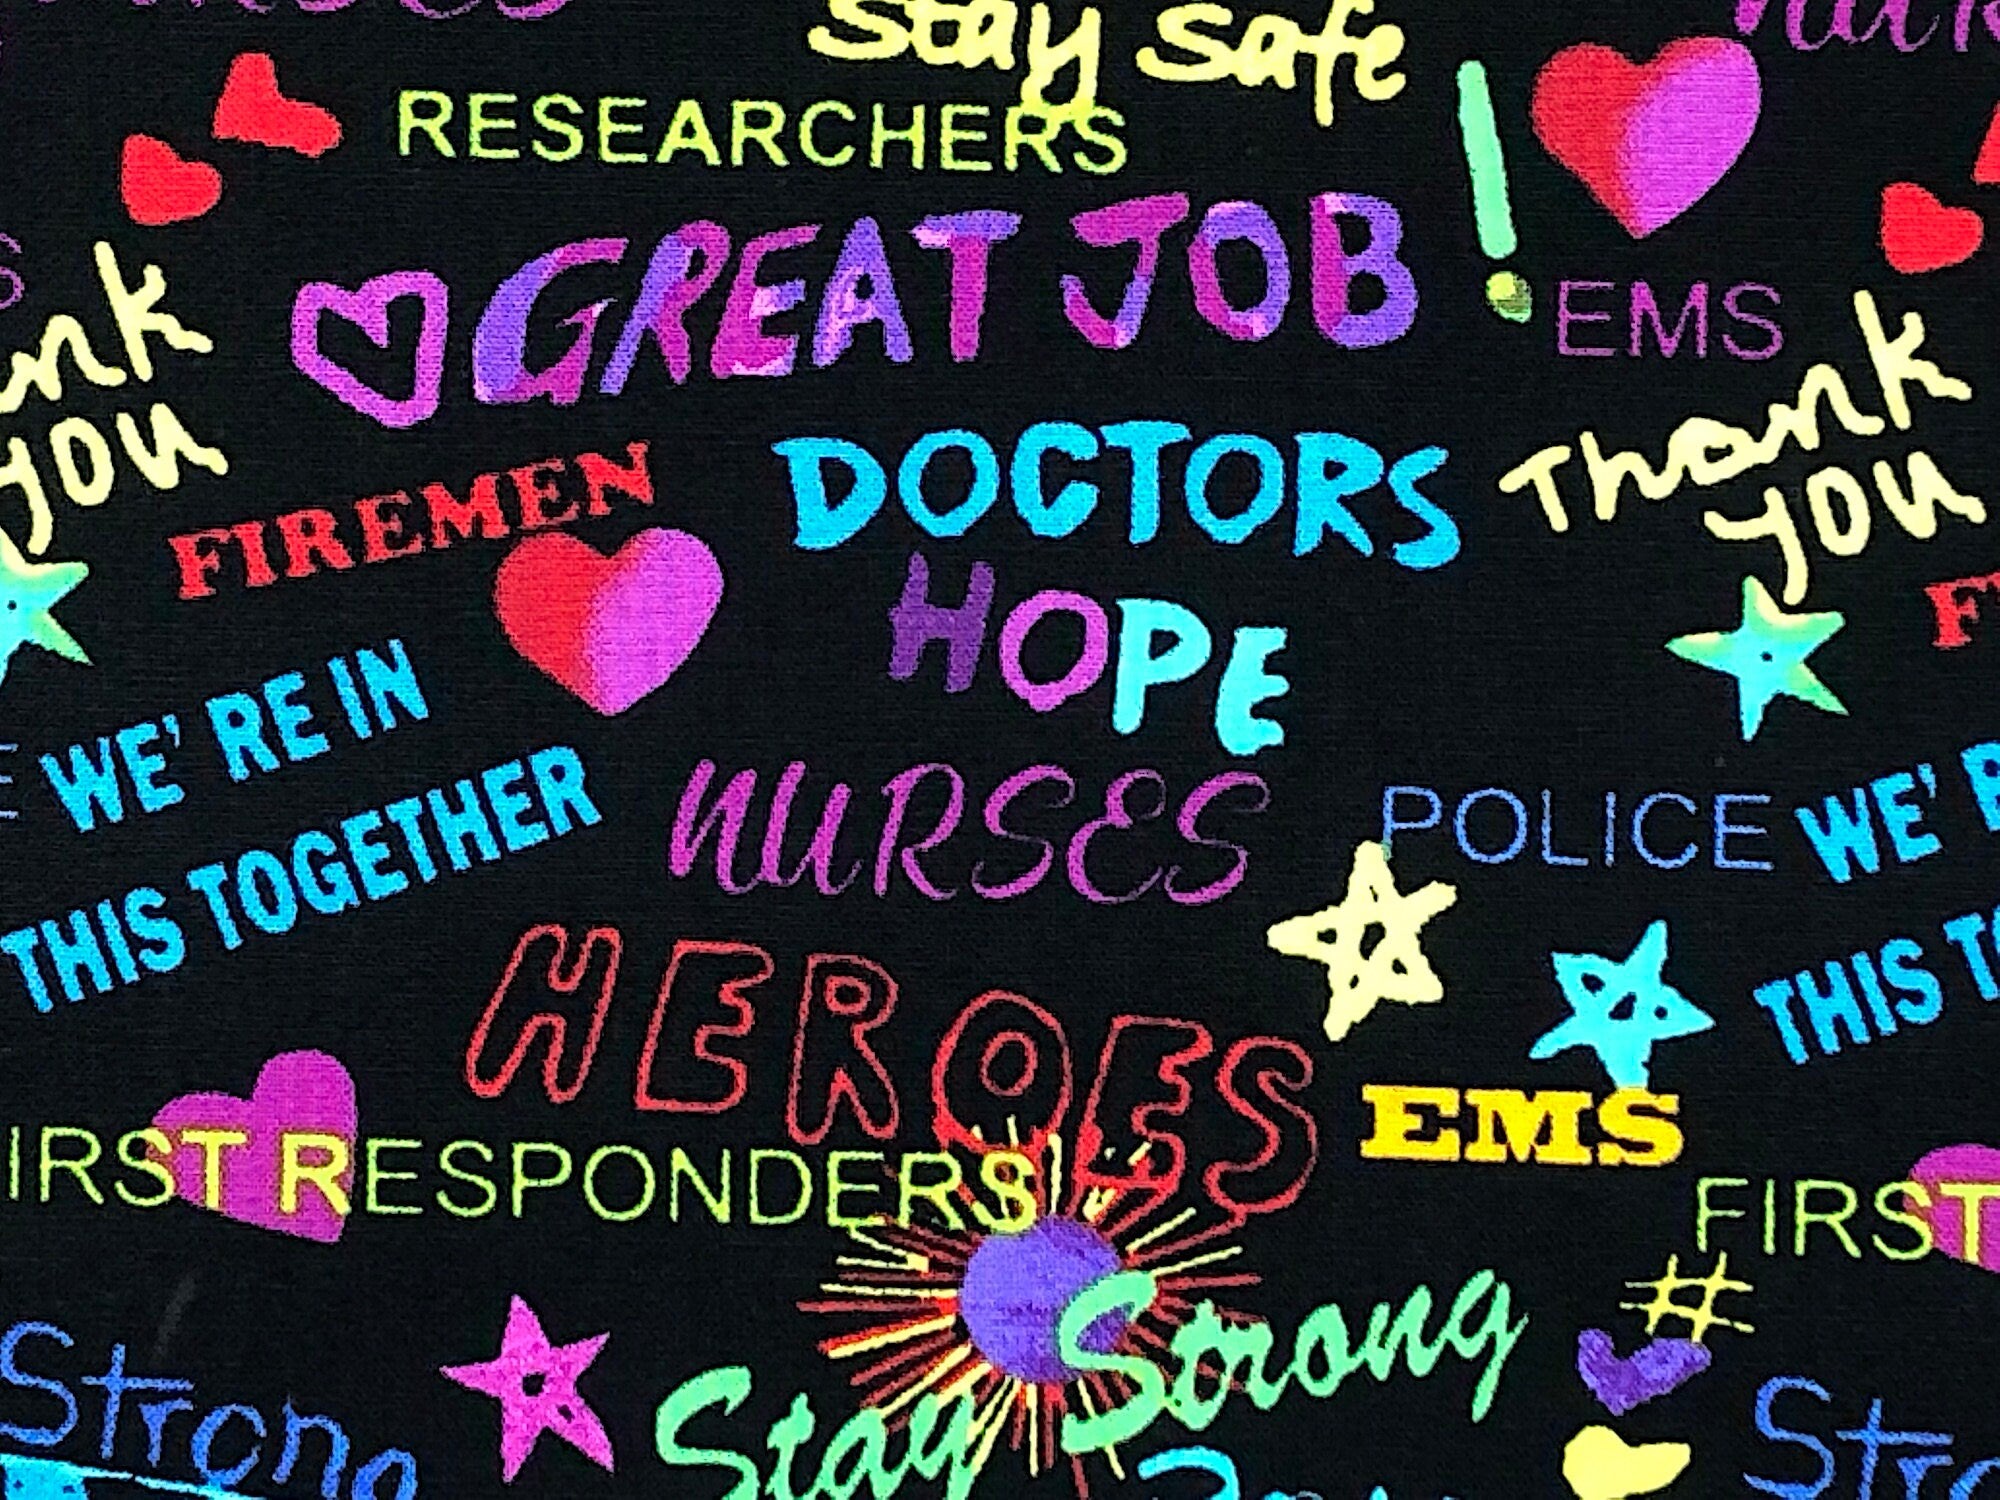 This black fabric is covered with hero sayings such as we're in this together, stay strong, nurse, heroes, police and more.